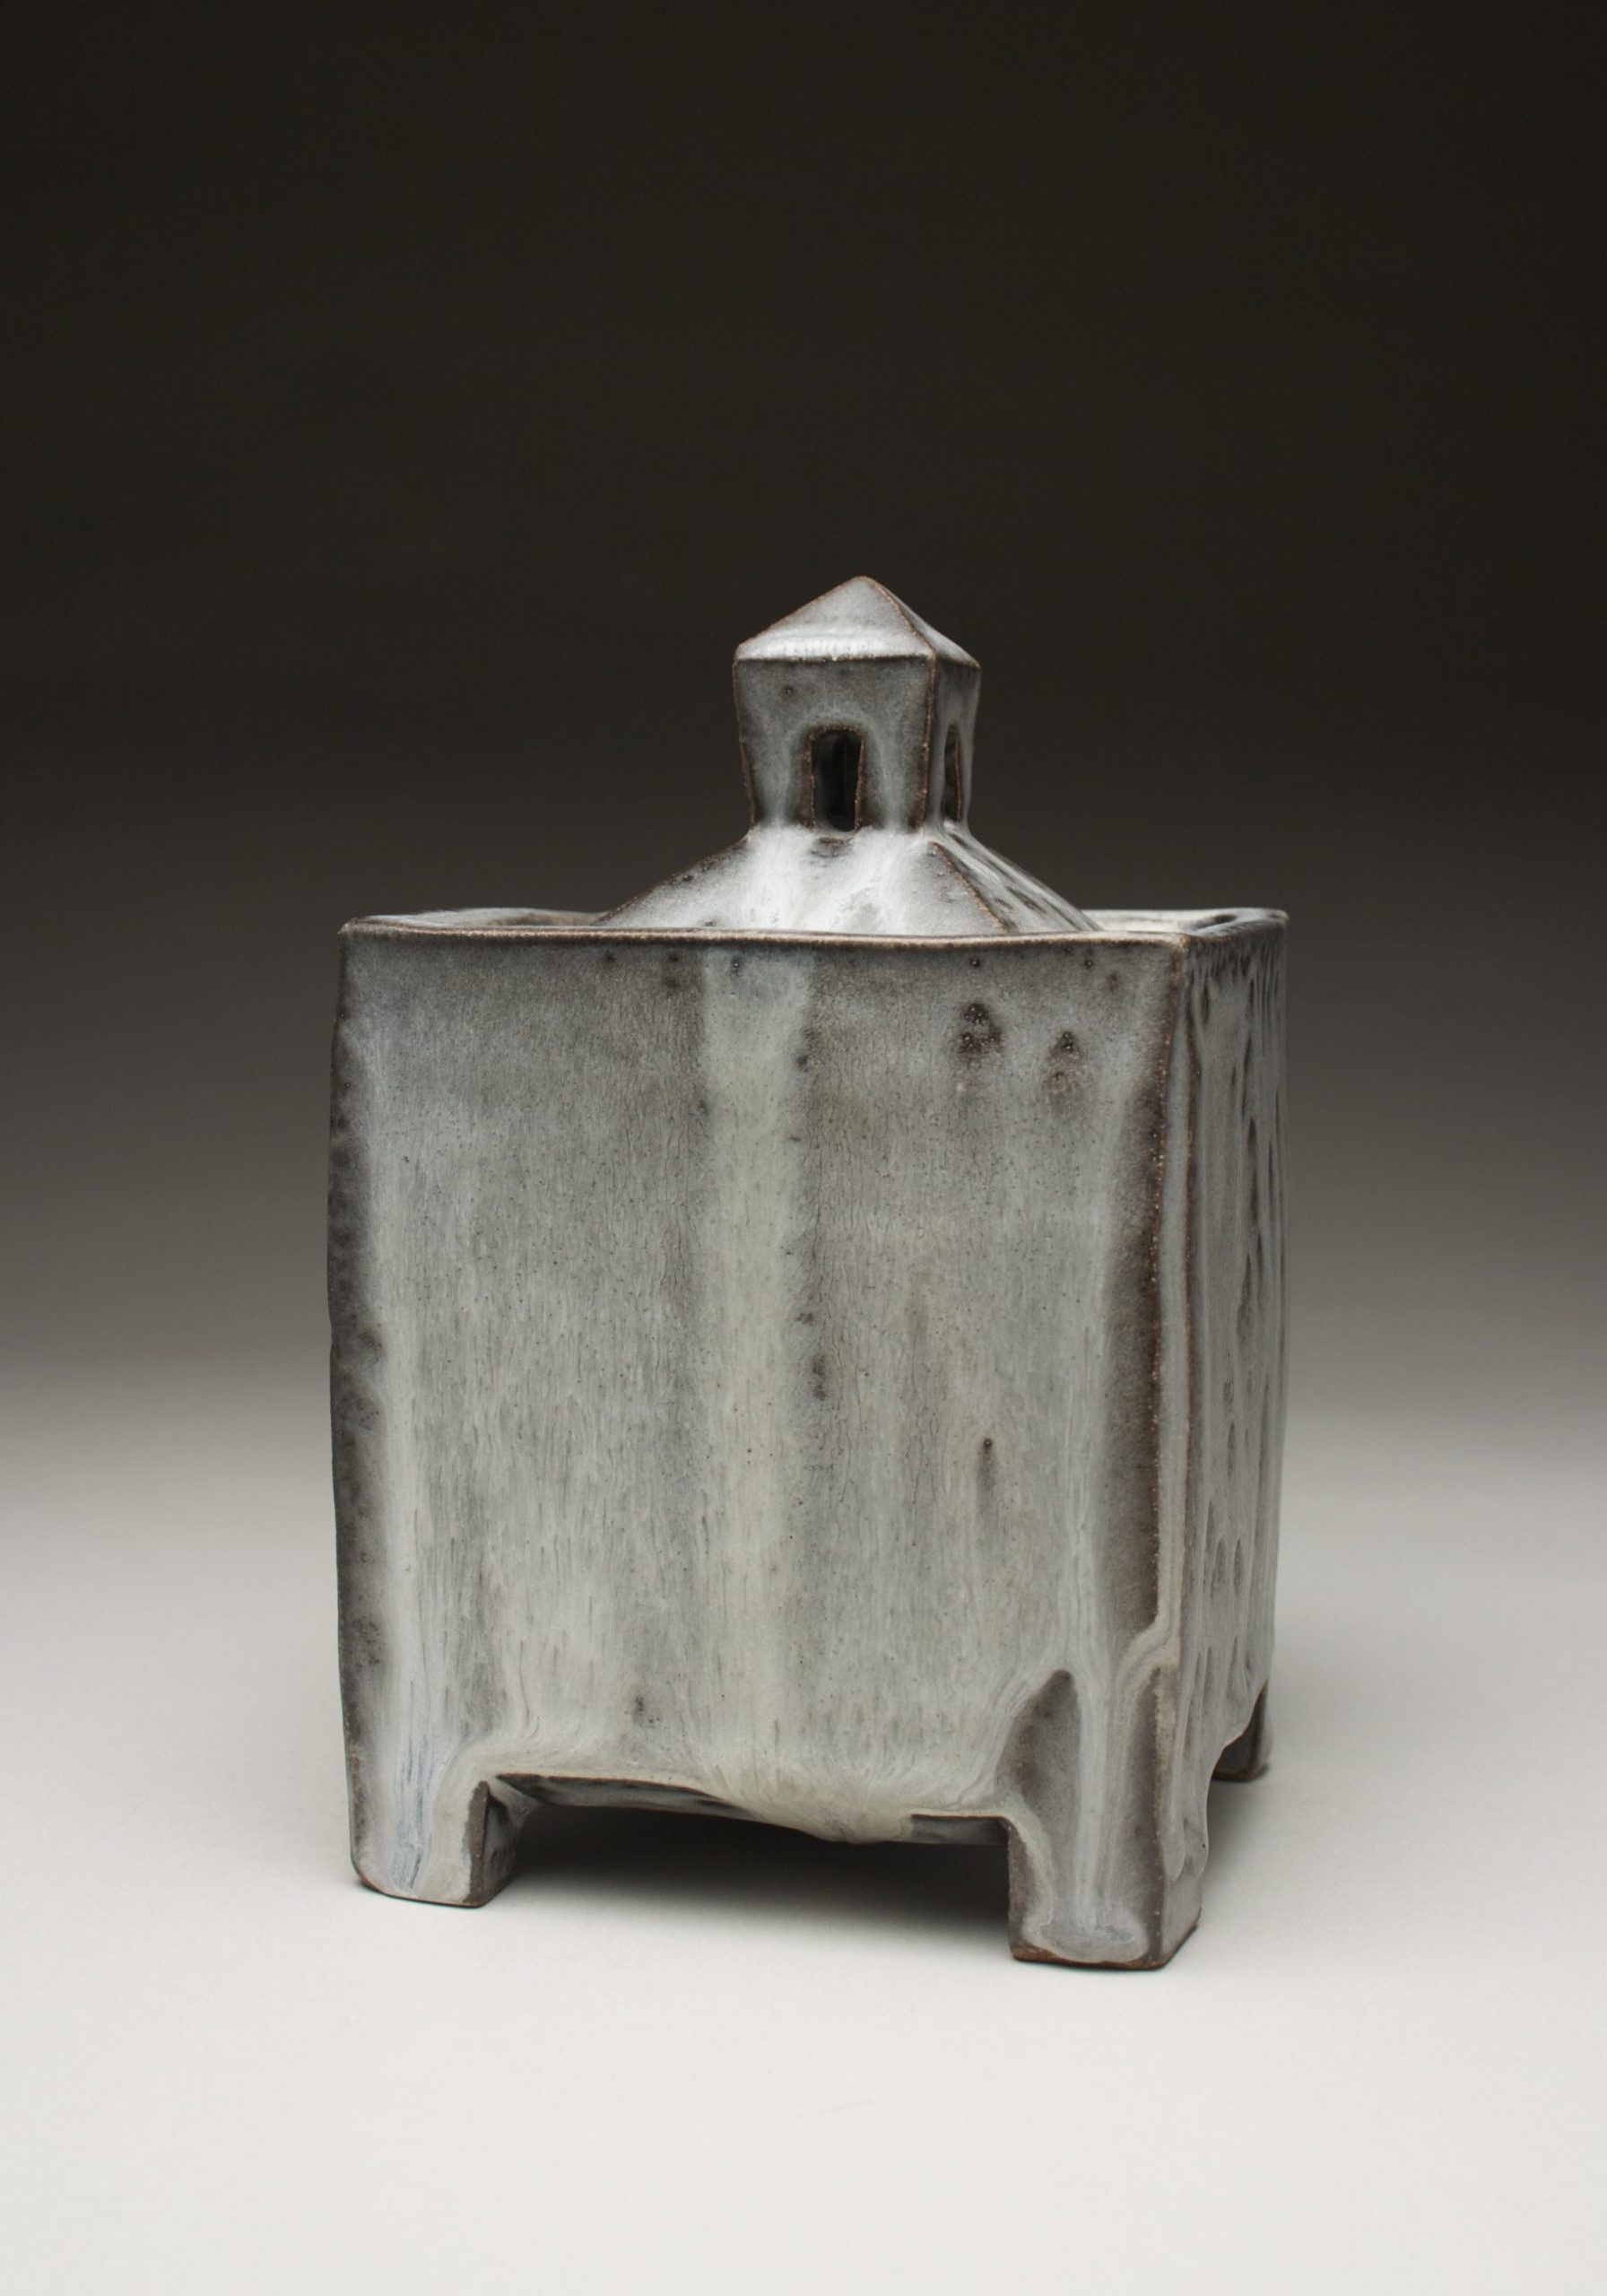 Ernest Miller, Box, 2020, stoneware, slip, and glaze, 6.5x4x4 inches, collection of the artist